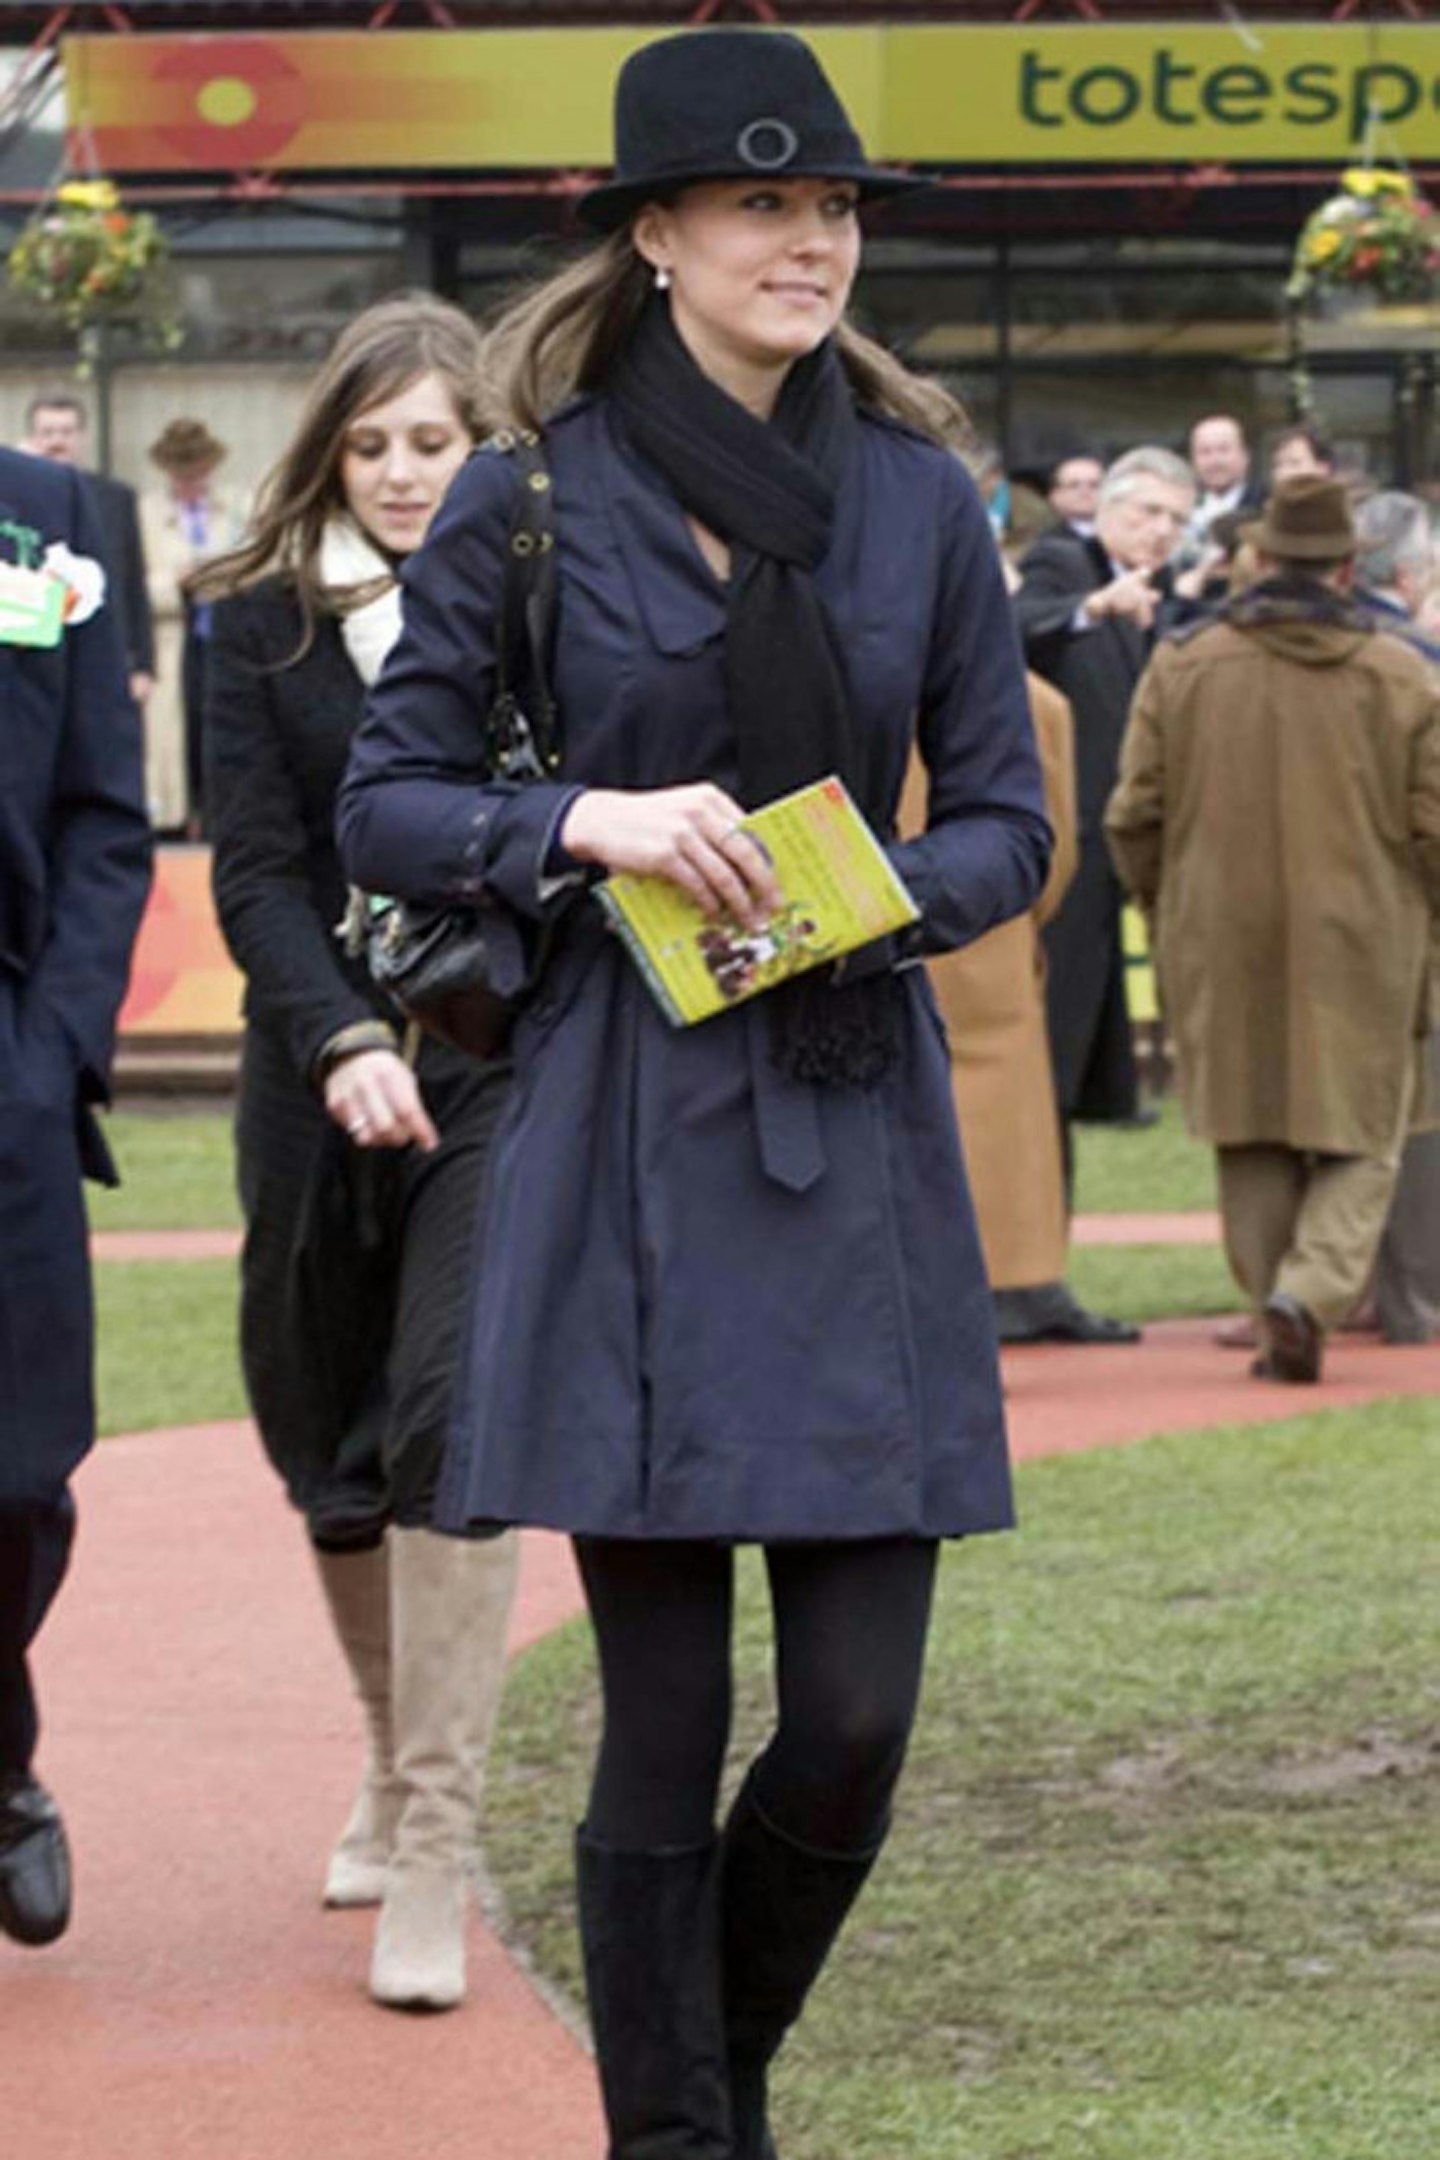 Kate Middleton at the The Cheltenham Horse Racing Festival, 14 March 2008